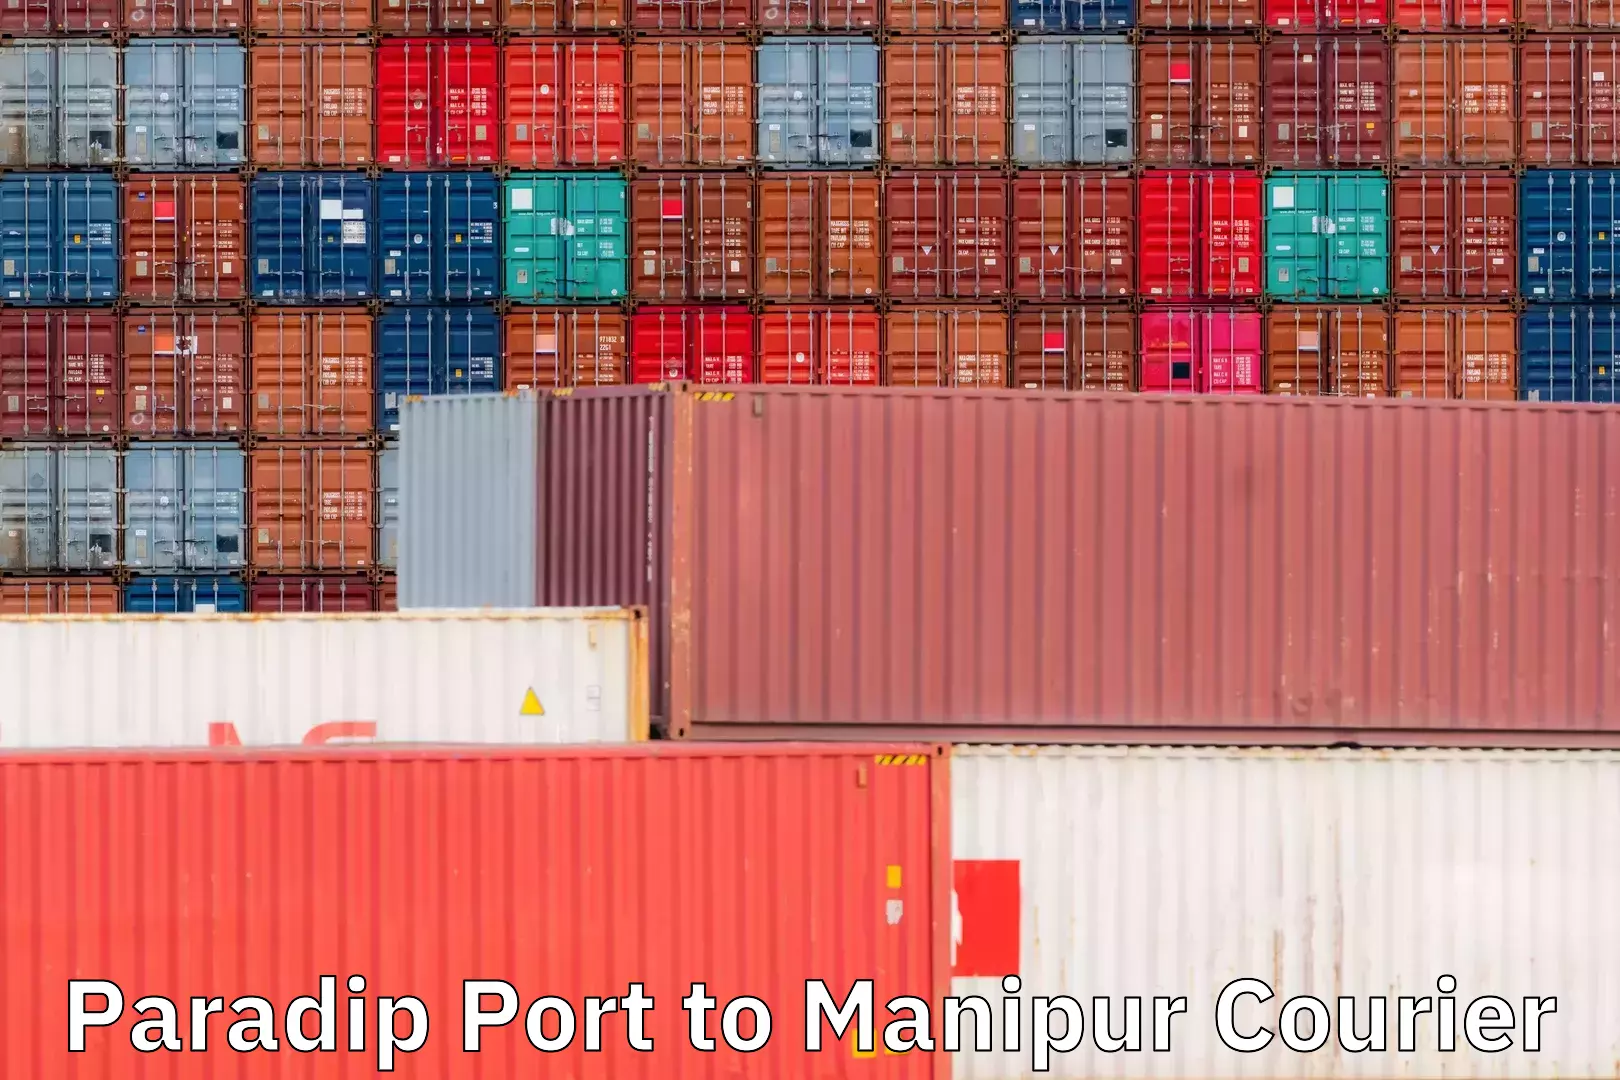 Lightweight parcel options Paradip Port to Thoubal